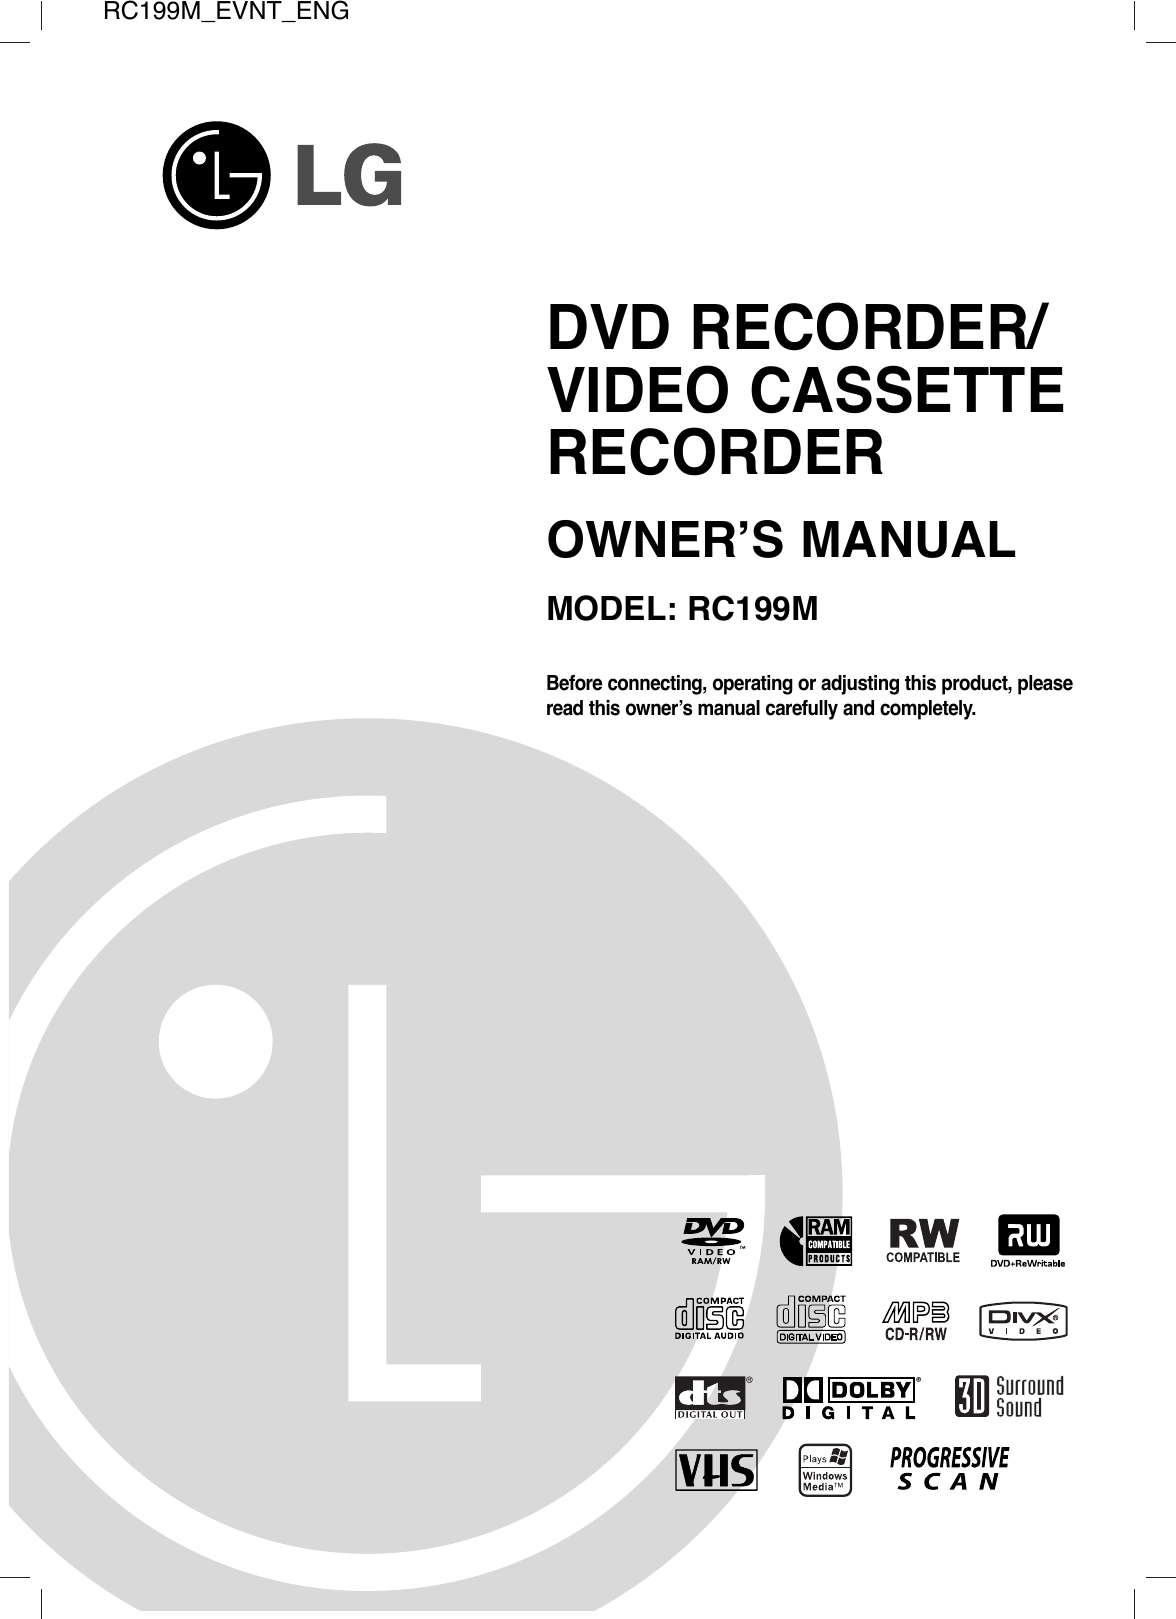 RC199M_EVNT_ENGBefore connecting, operating or adjusting this product, pleaseread this owner’s manual carefully and completely.DVD RECORDER/VIDEO CASSETTERECORDEROWNER’S MANUALMODEL: RC199M